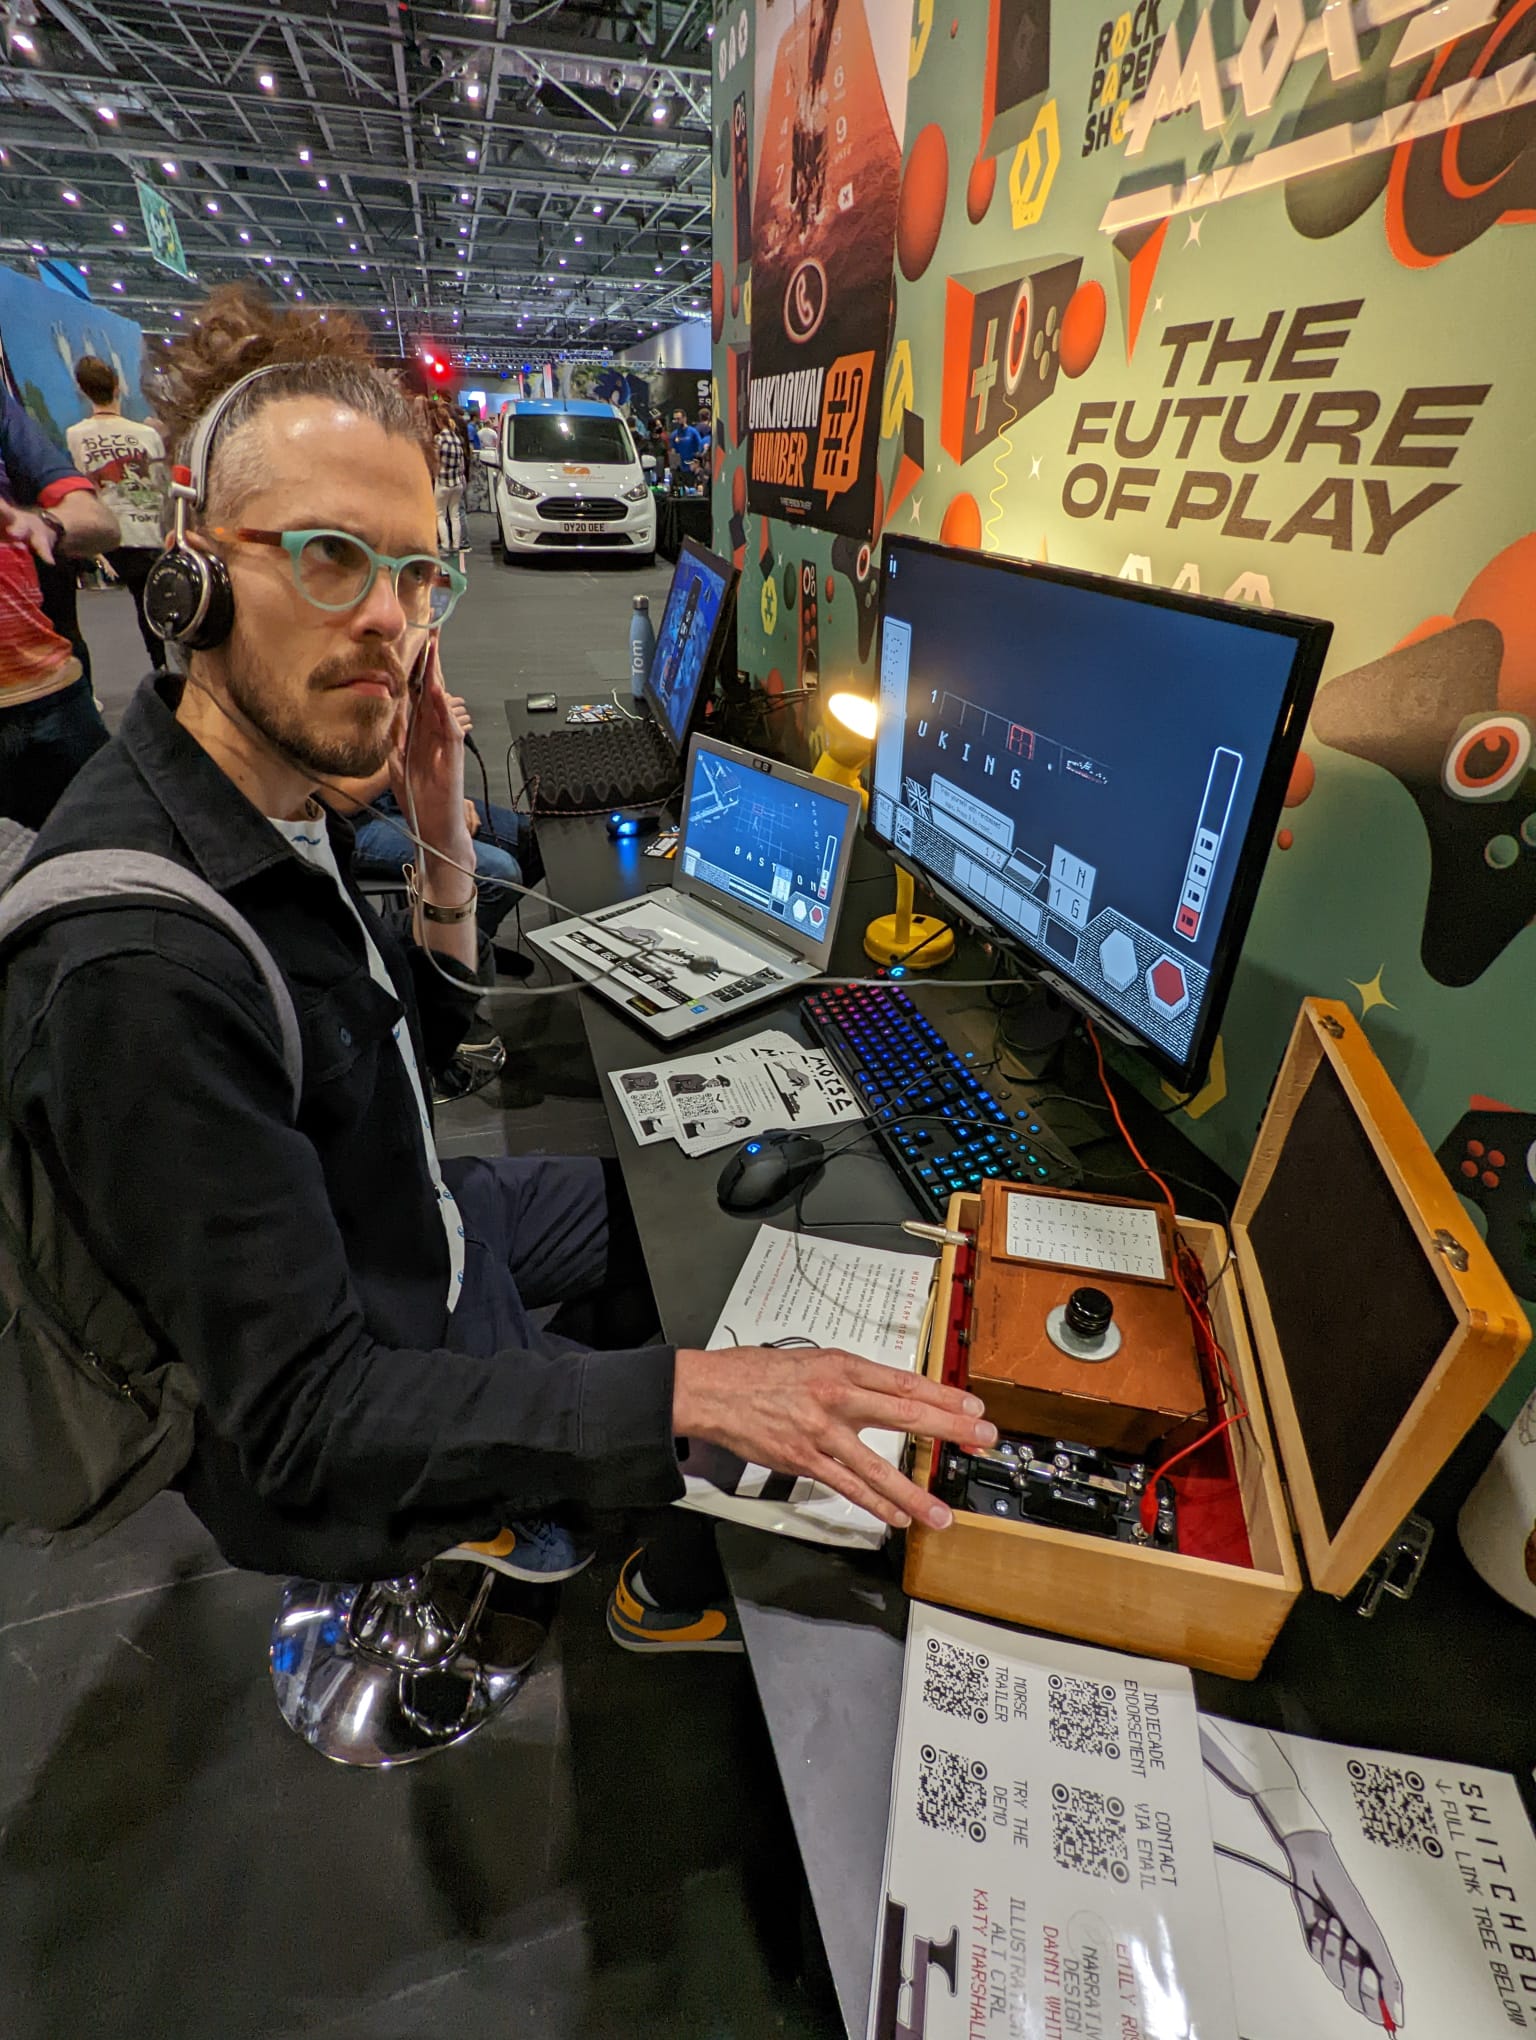 Bertie playing a Morse Code game at EGX. There's a wooden box on a bench with the familiar little Morse Code clicker on it, and a big launcher button nearby. Bertie looks rapt.